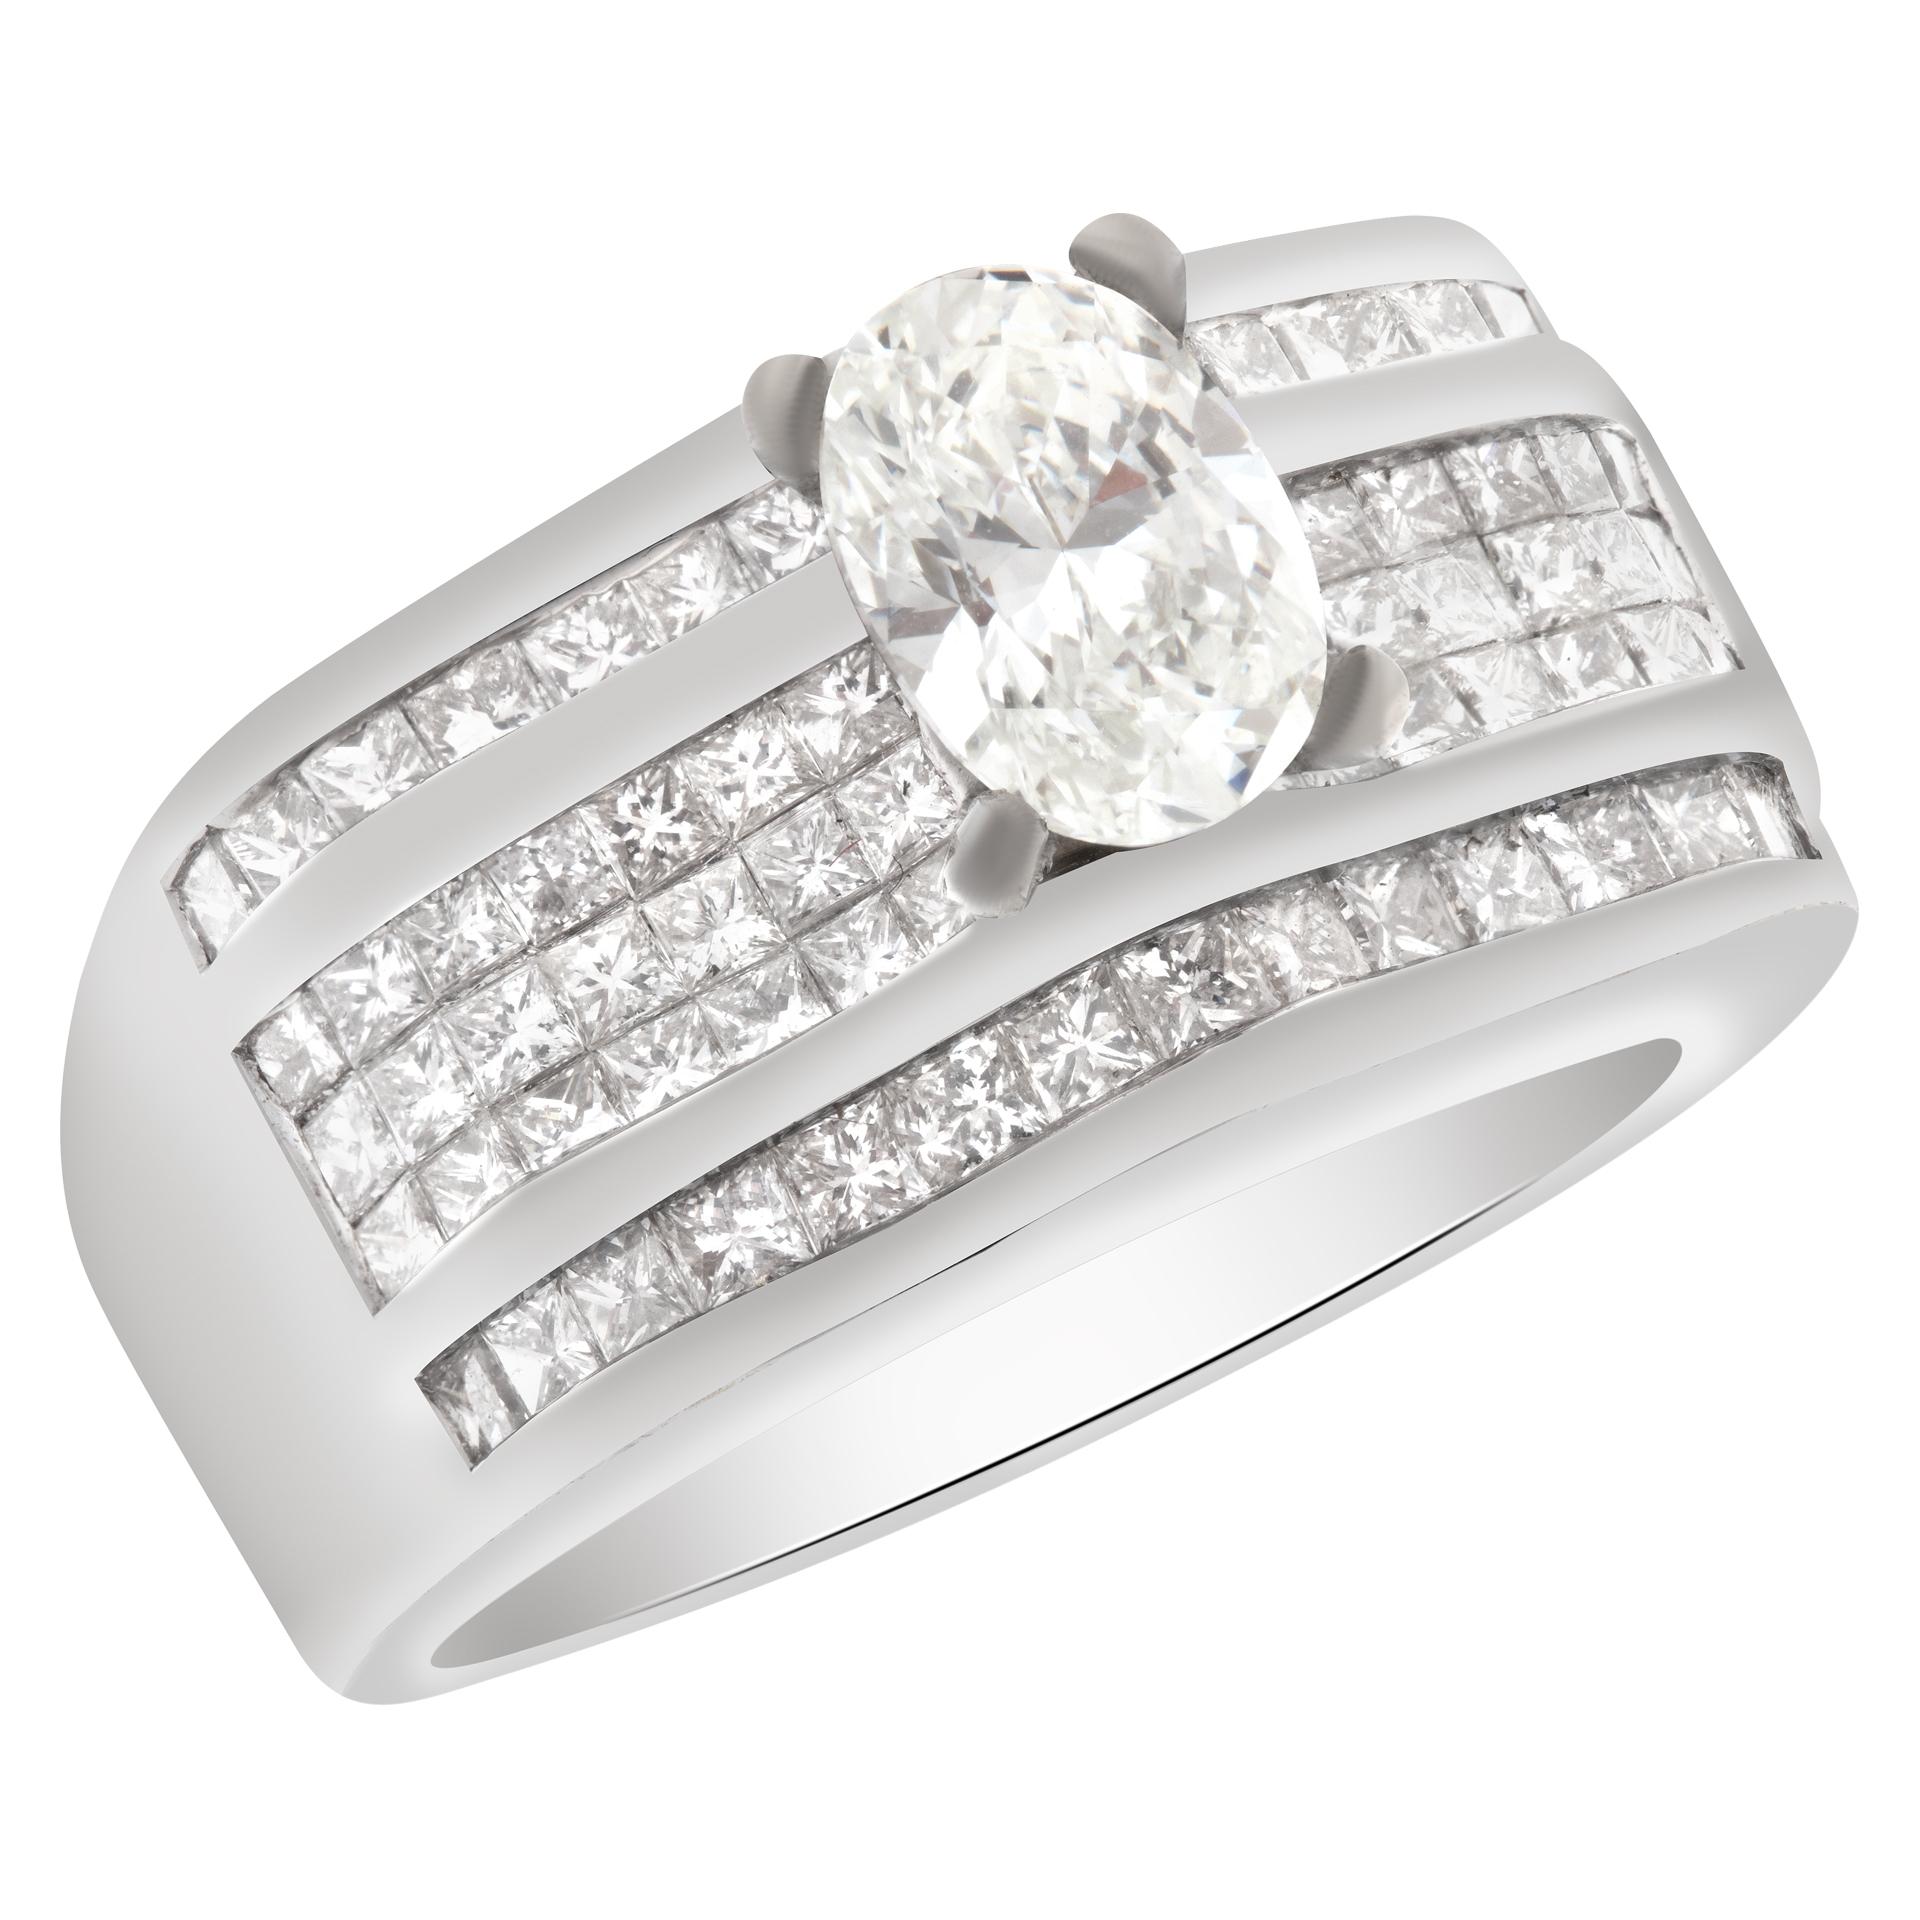 GIA certified oval brilliant cut diamond 1 carat (G color, VS2 clarity) ring set in 18k white gold setting with 1.47 carats in diamonds accents. Size 7This GIA certified ring is currently size 7 and some items can be sized up or down, please ask! It